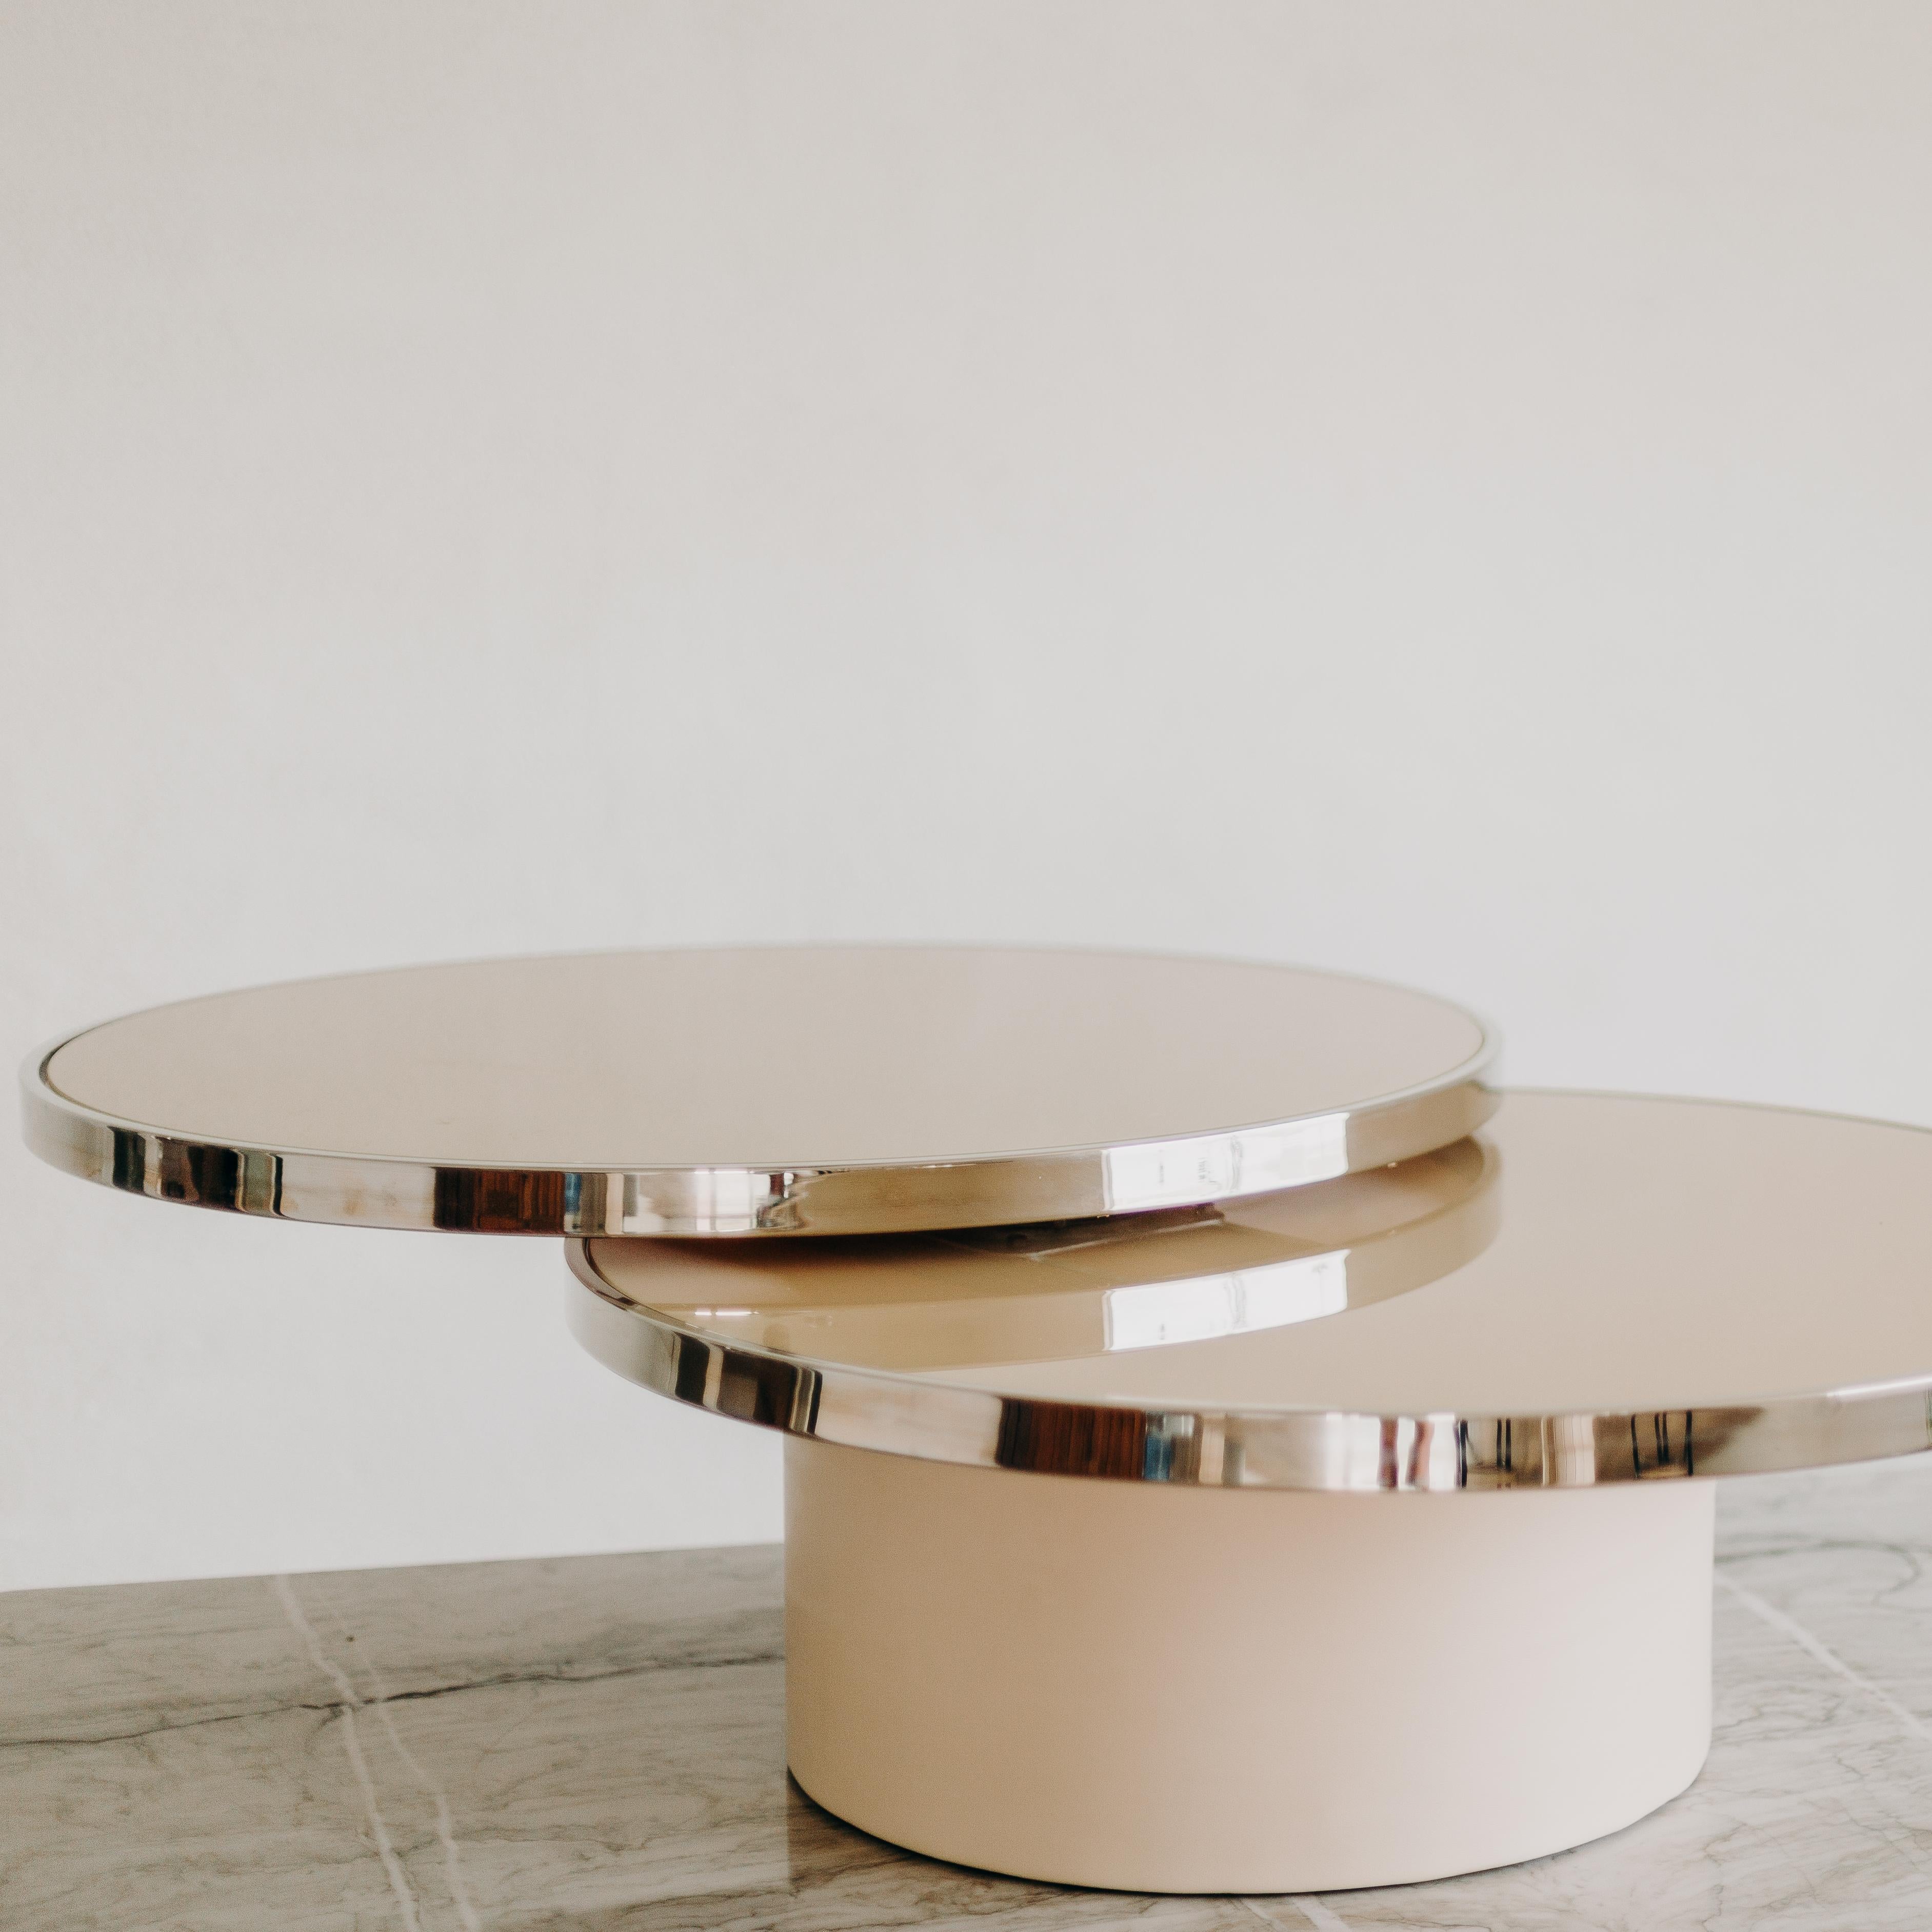 Late 20th Century Round Swivel Ivory Glass & Chrome Coffee Table by Design Institute of America